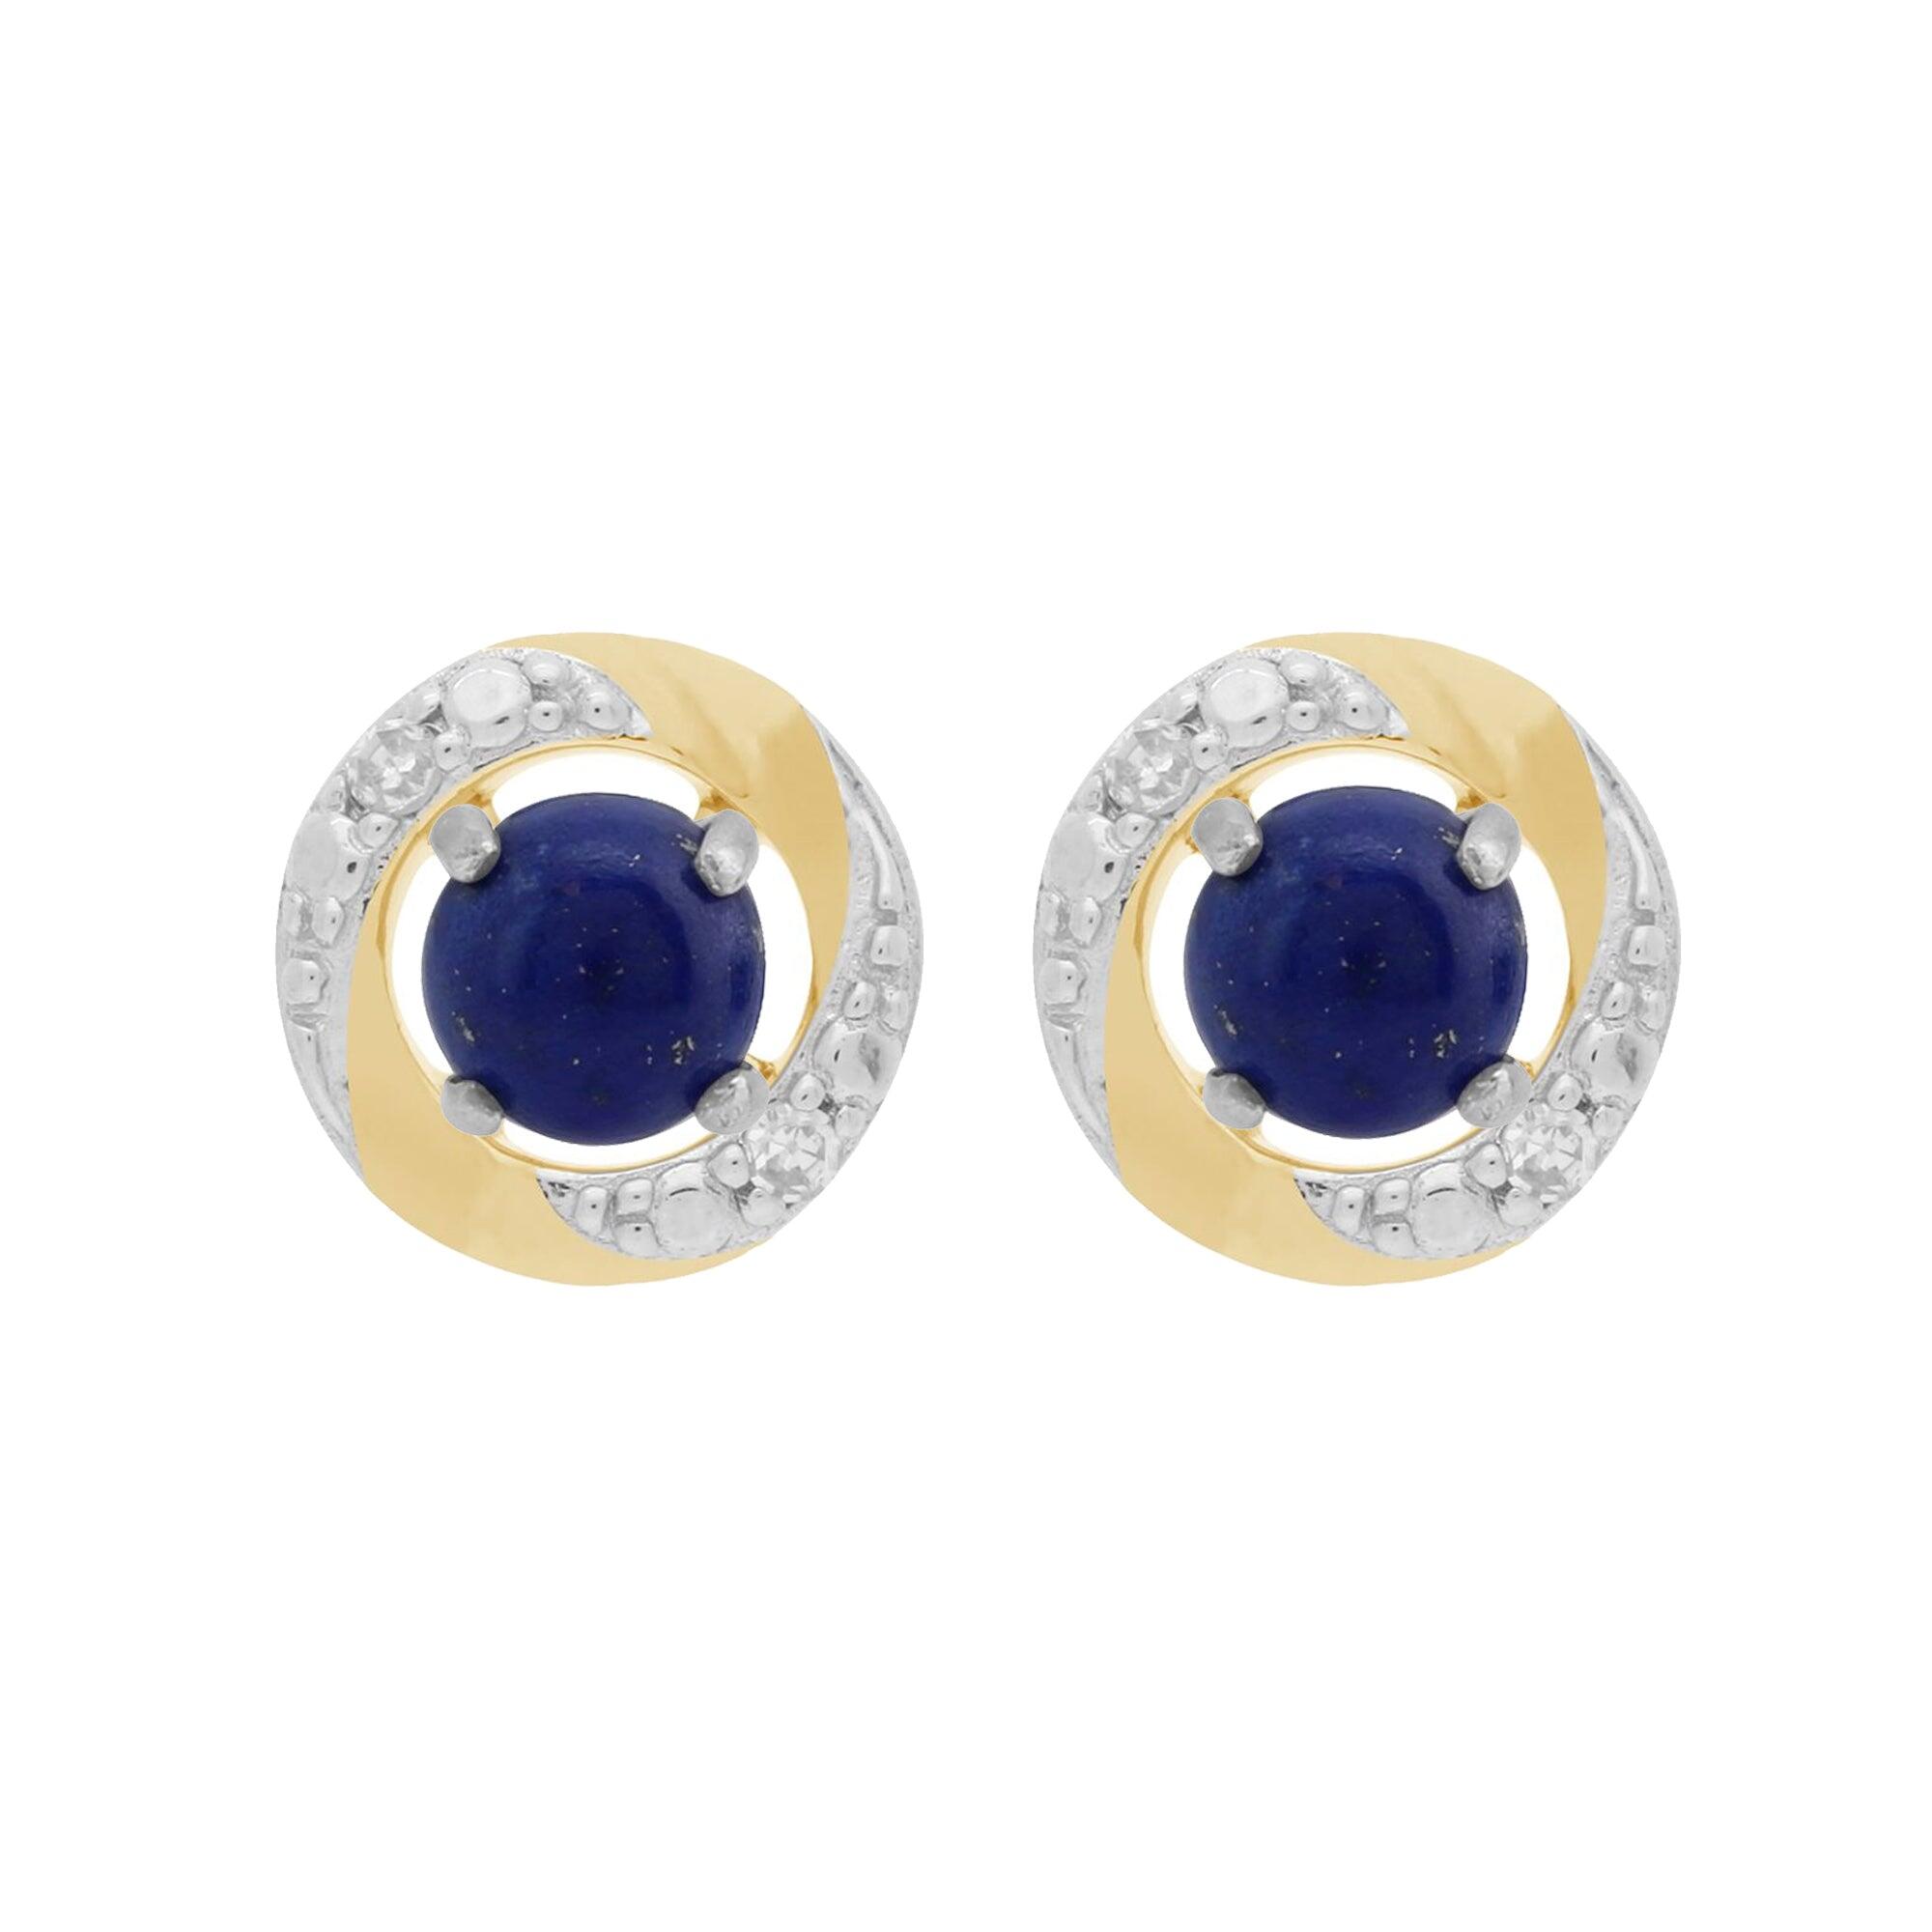 9ct White Gold Lapis Lazuli Stud Earrings with Detachable Diamond Halo Ear Jacket in 9ct Yellow Gold